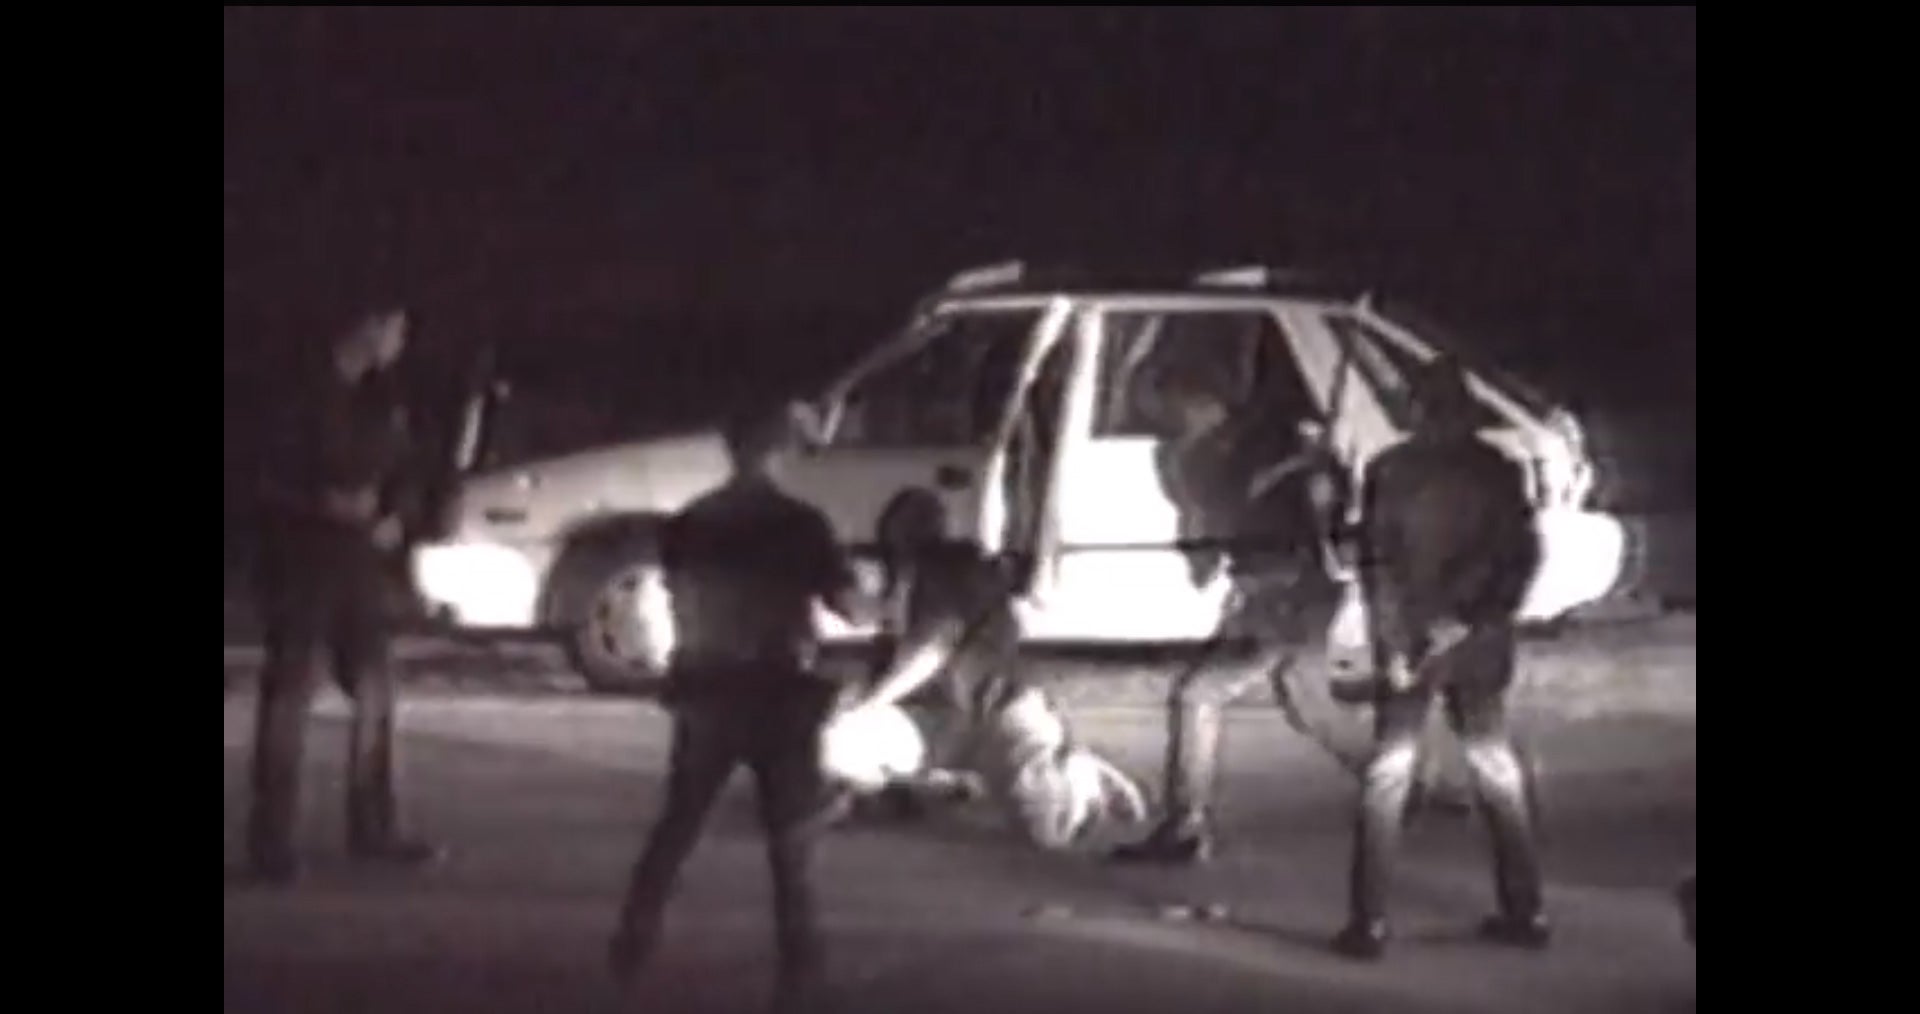 Caught On Tape: 10 Videos of Police Brutality